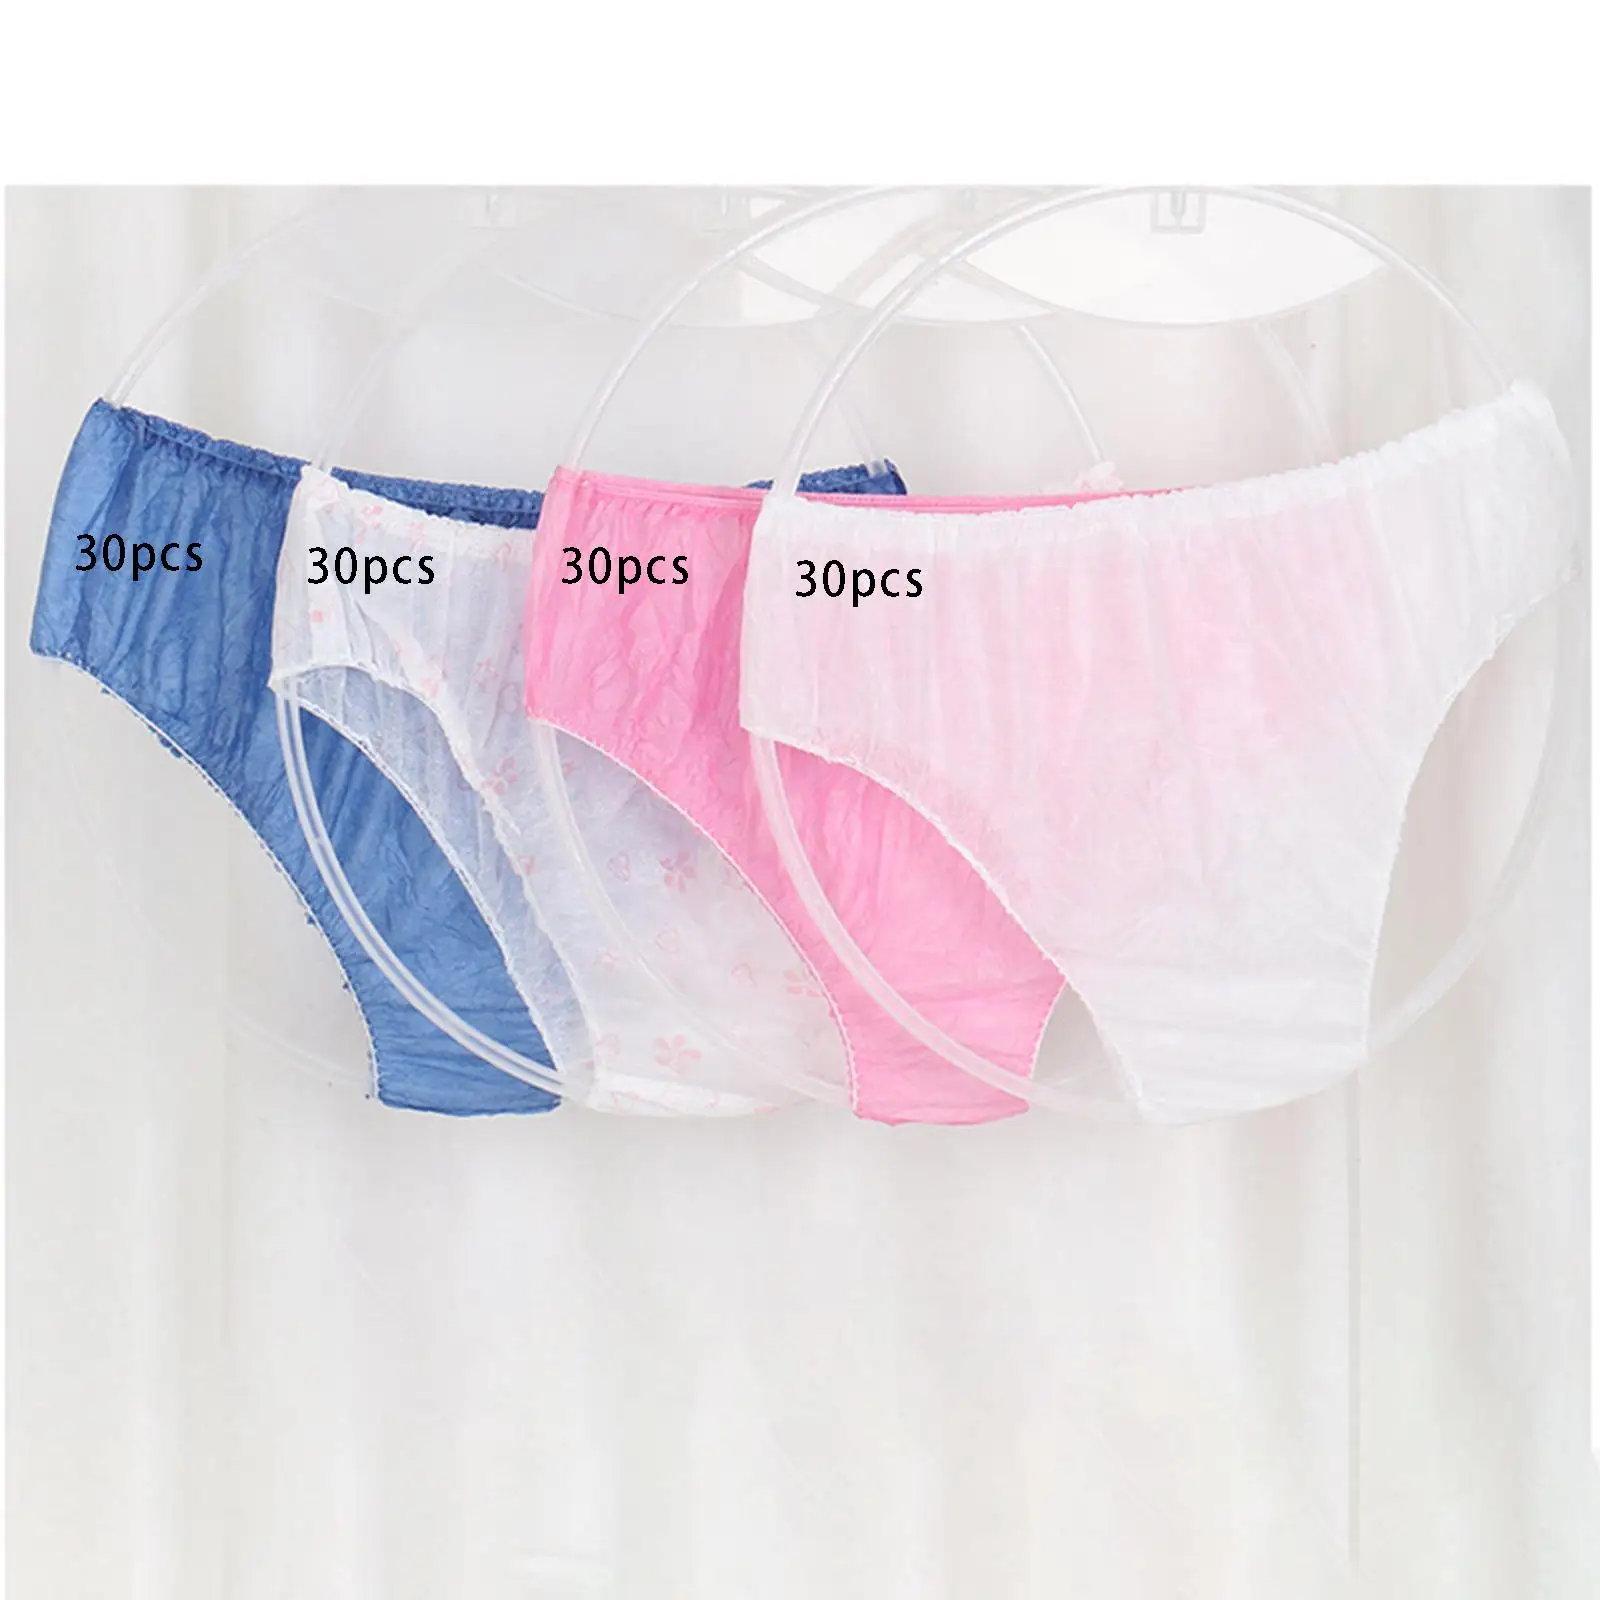 Disposable Briefs Non Woven Fabric Mid Waist Design Skin Friendly Breathable Healthy Panties for Hotel SPA Everyday Salon Ladies